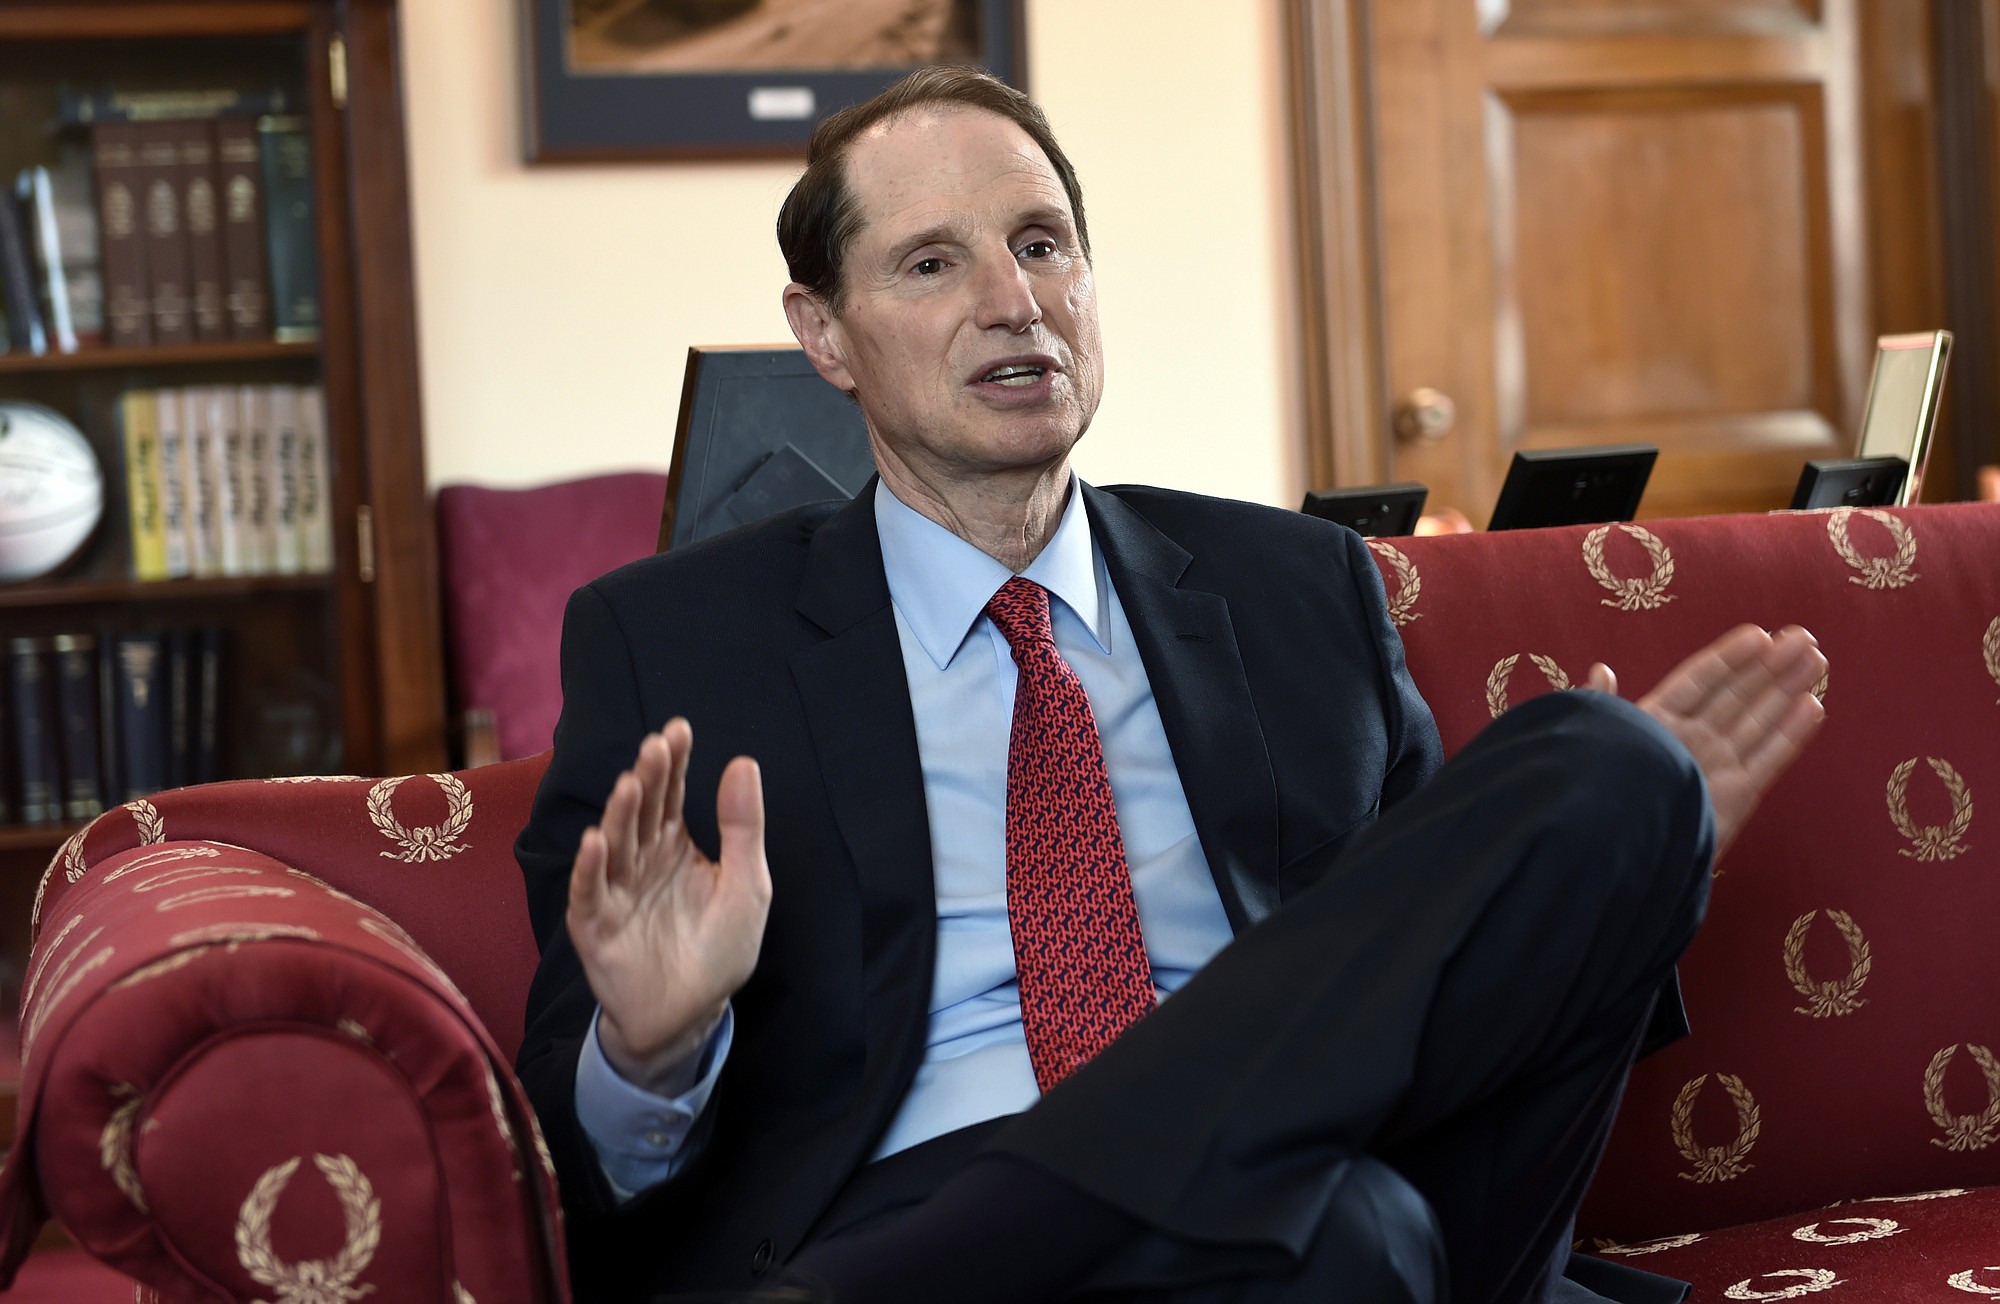 Sen. Ron Wyden, D-Ore., discusses issues Wednesday in his office on Capitol Hill in Washington. Wyden is playing a leading role in some of Congress' toughest debates. The three-term senator is the chief Democratic negotiator on trade legislation that would allow President Barack Obama to negotiate an historic accord with 11 Pacific Rim nations.